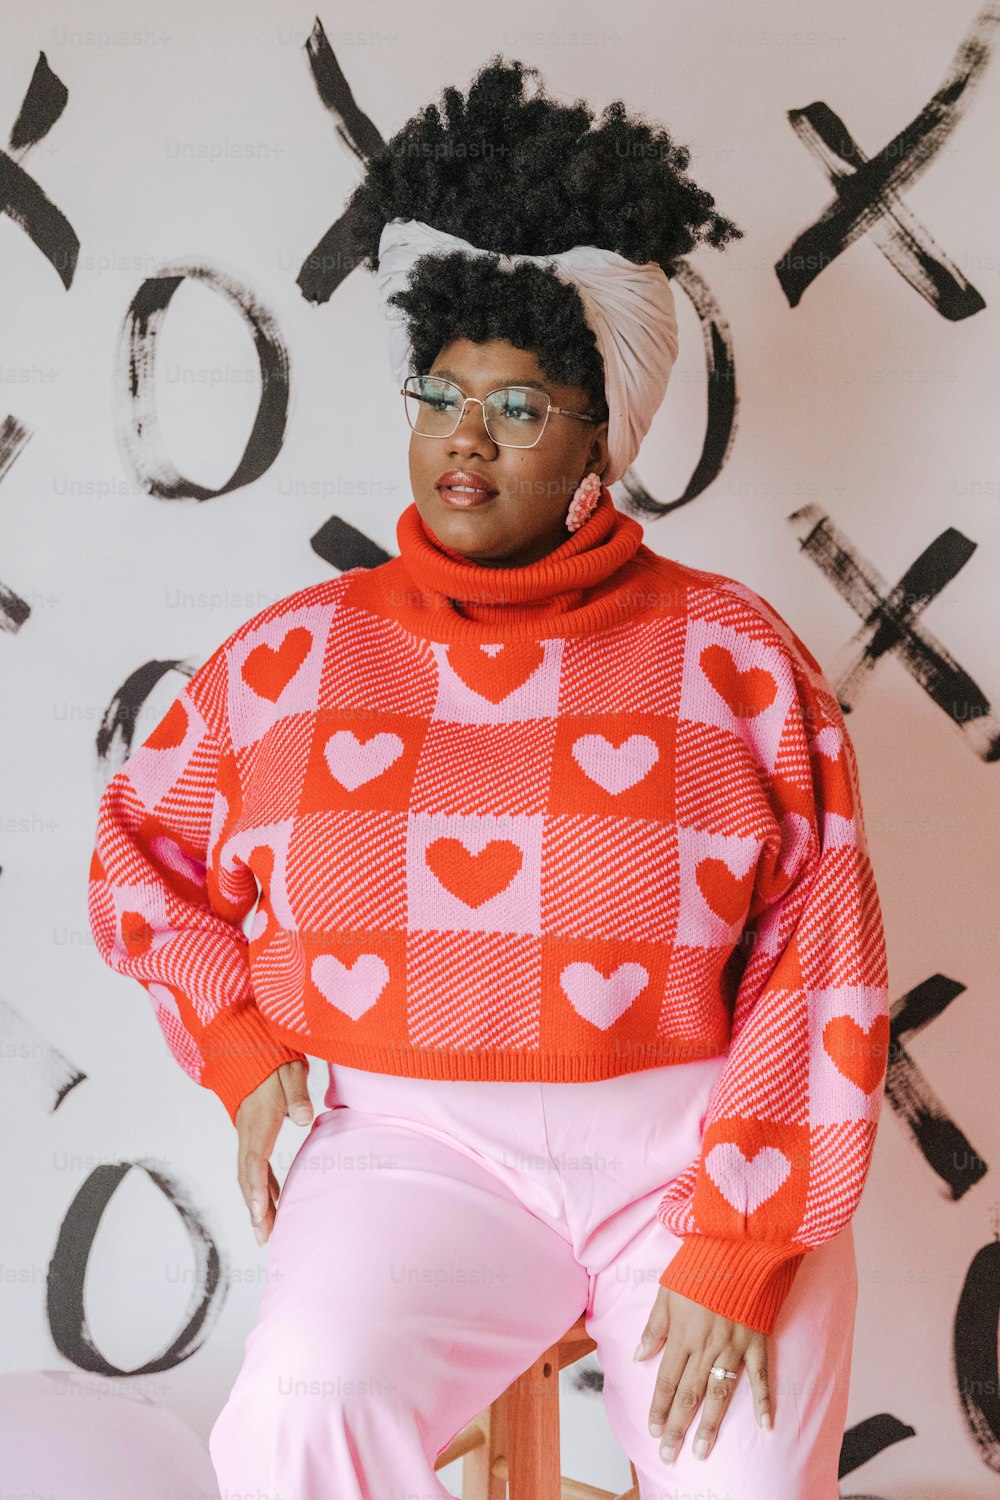 a woman sitting on a chair wearing a red and white sweater with hearts on it